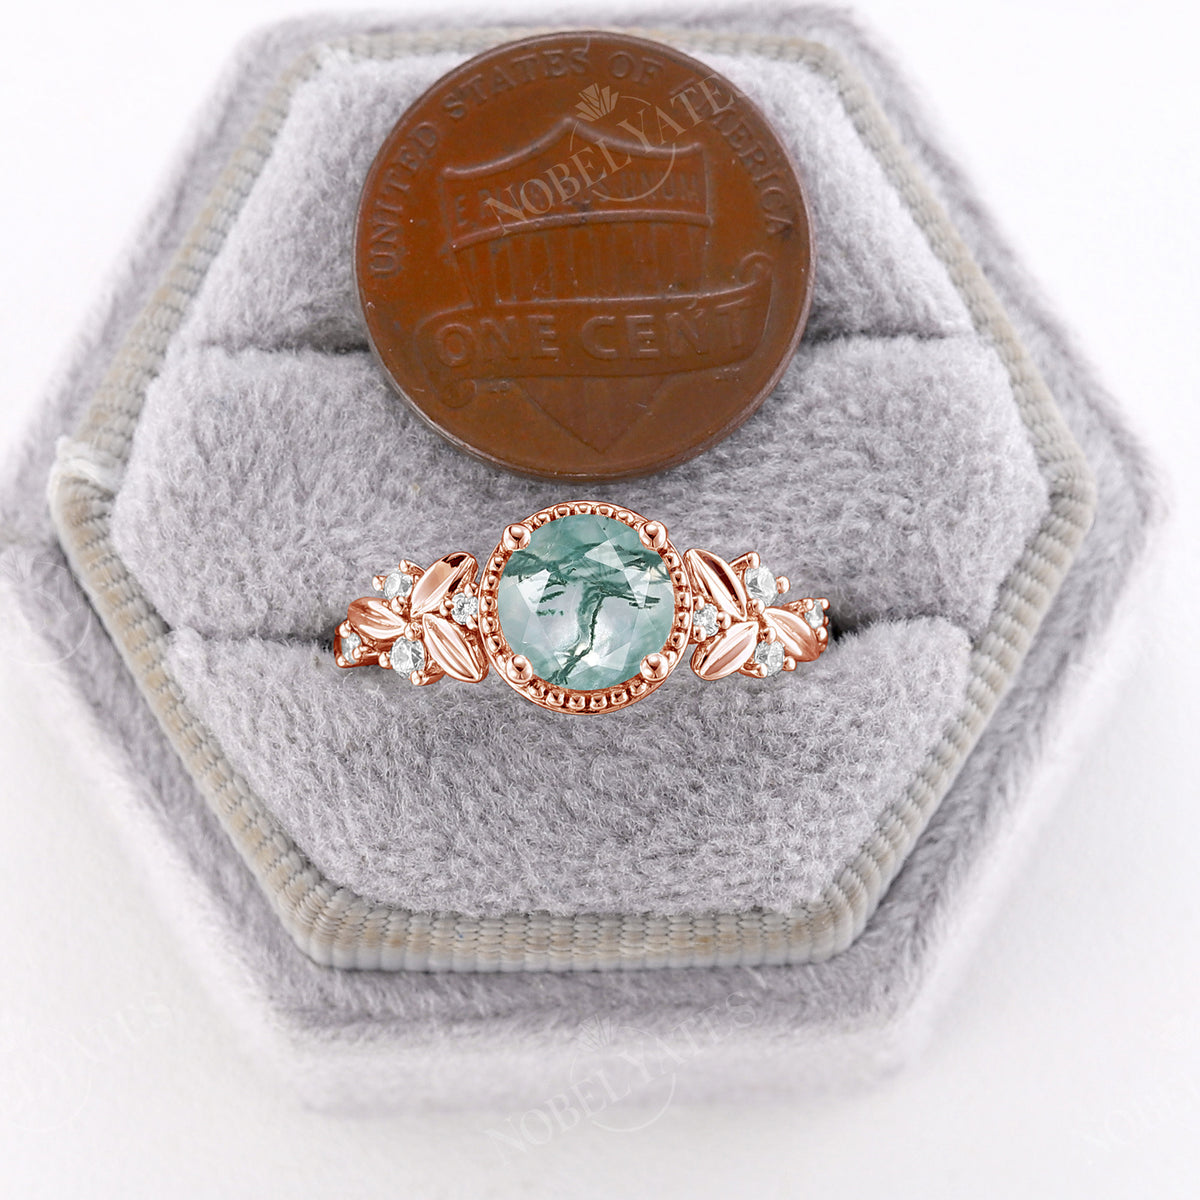 Round Moss Agate Nature Leaf Design Engagement Ring Rose Gold